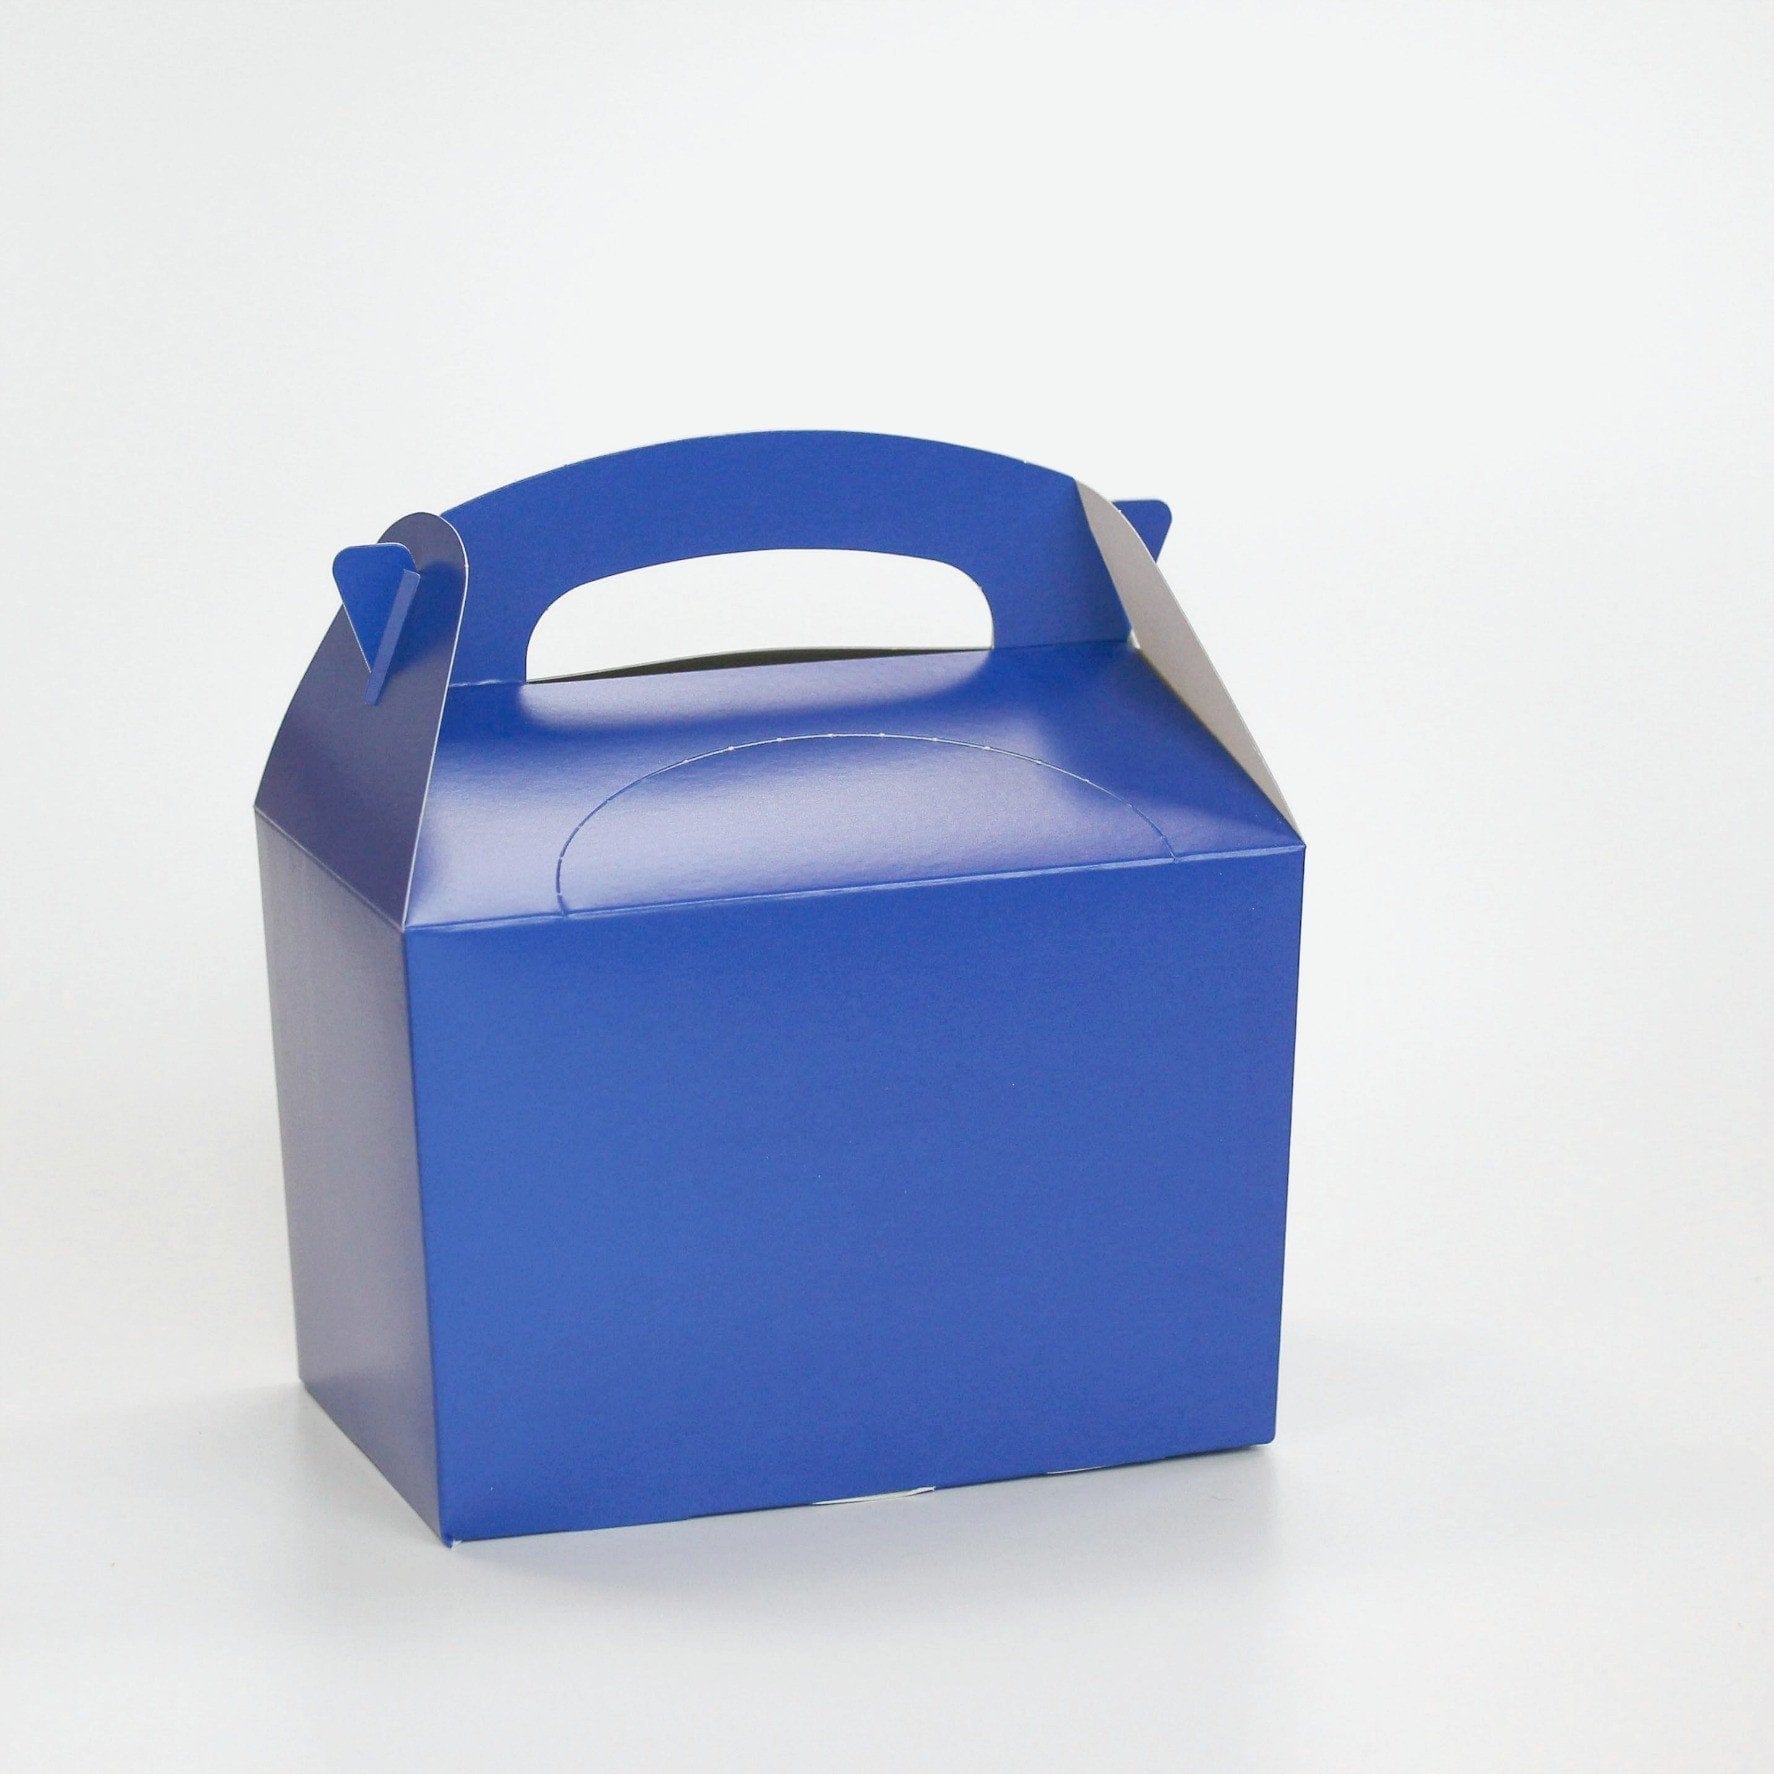 Blue Party Lunch Boxes | Party Boxes & Party Food Ideas Online UK Oaktree UK